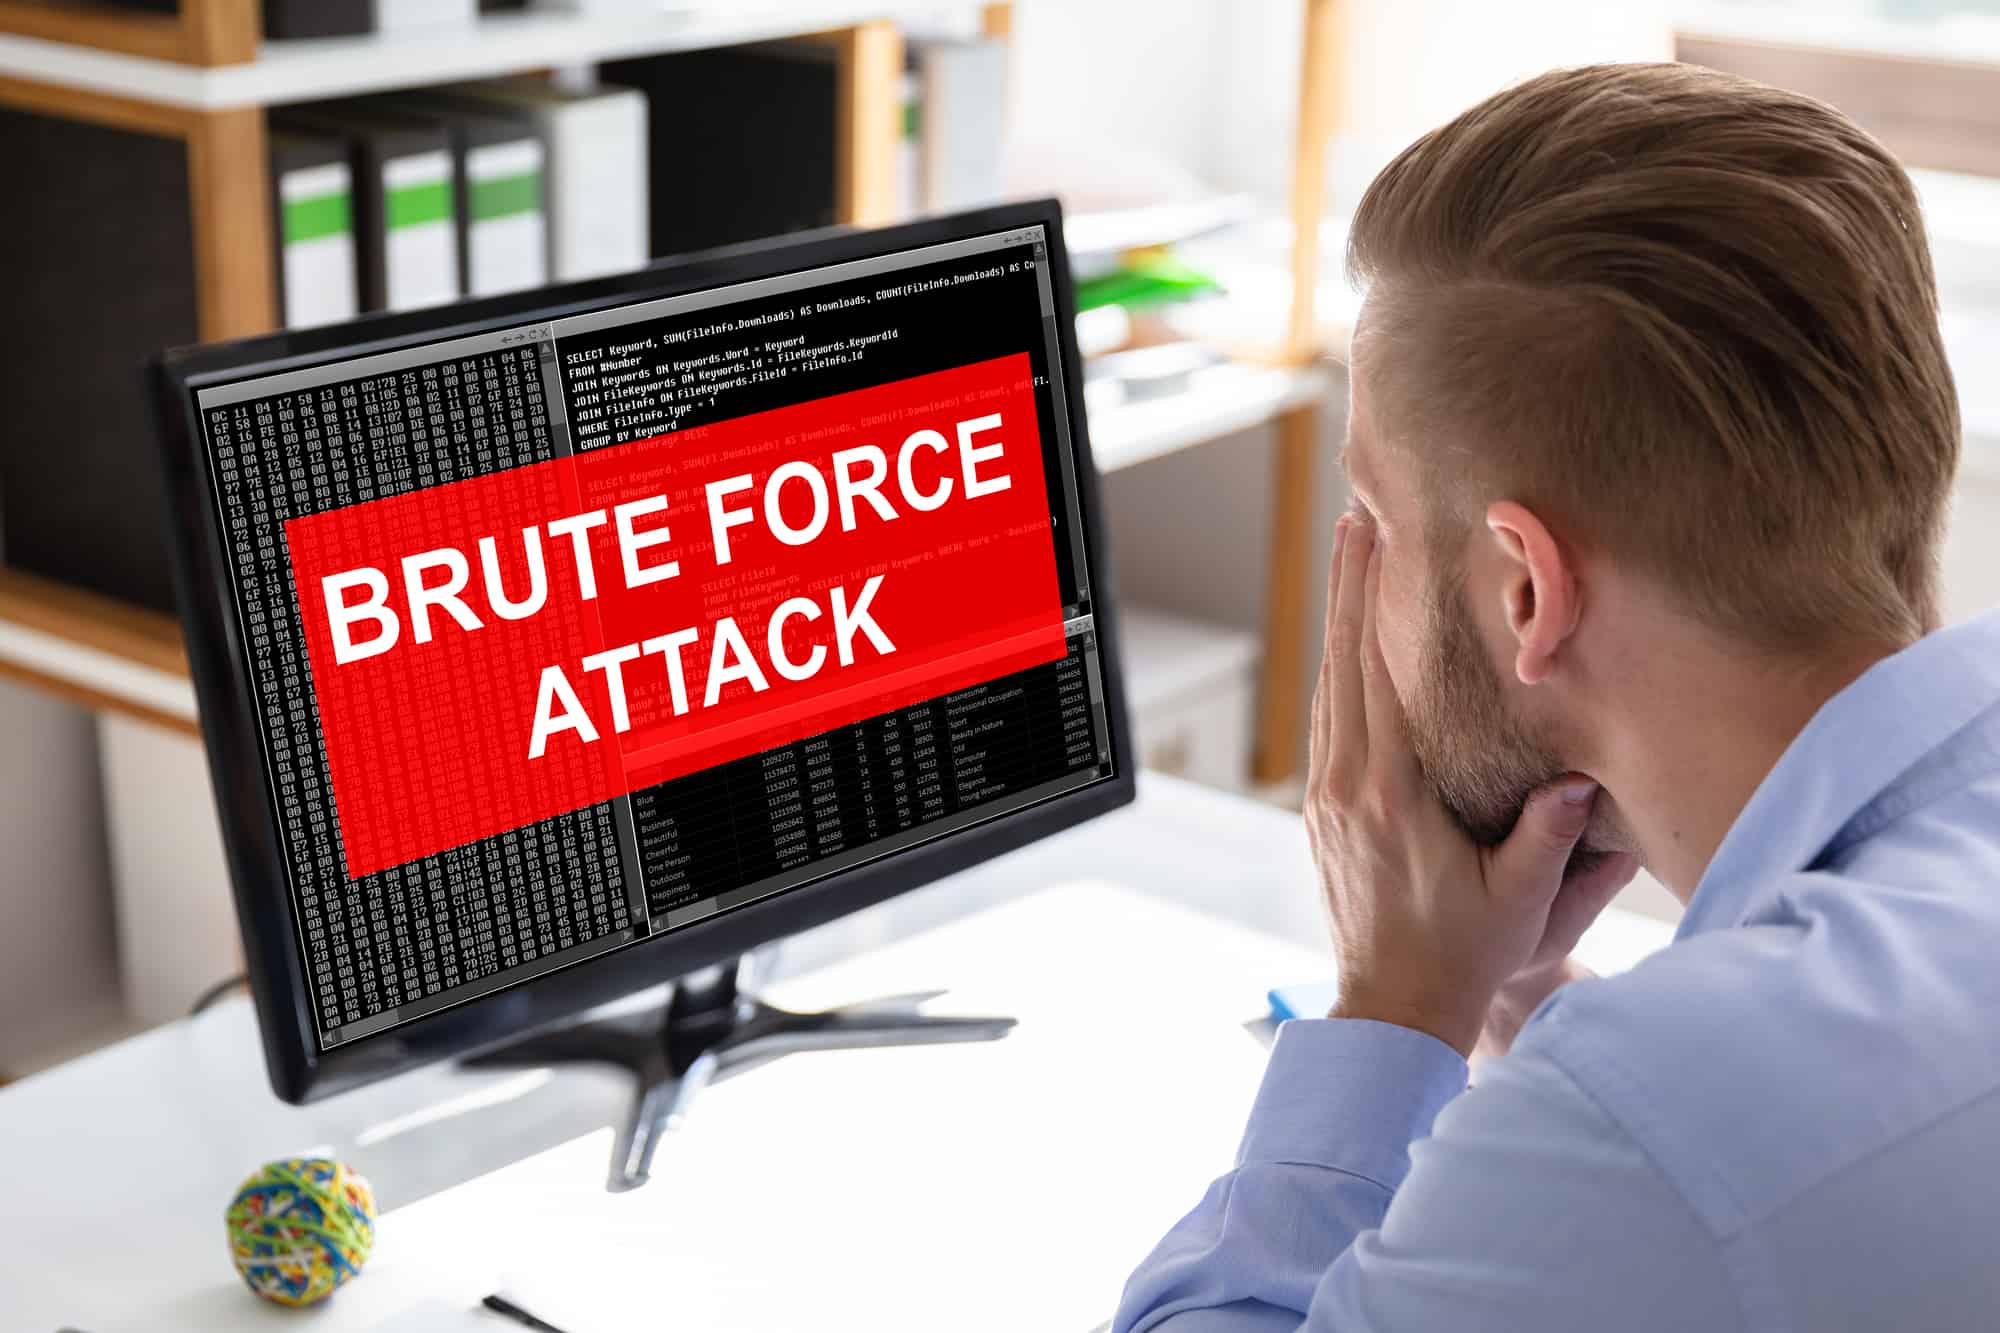 Brute Force Attack: what is it and how to prevent it